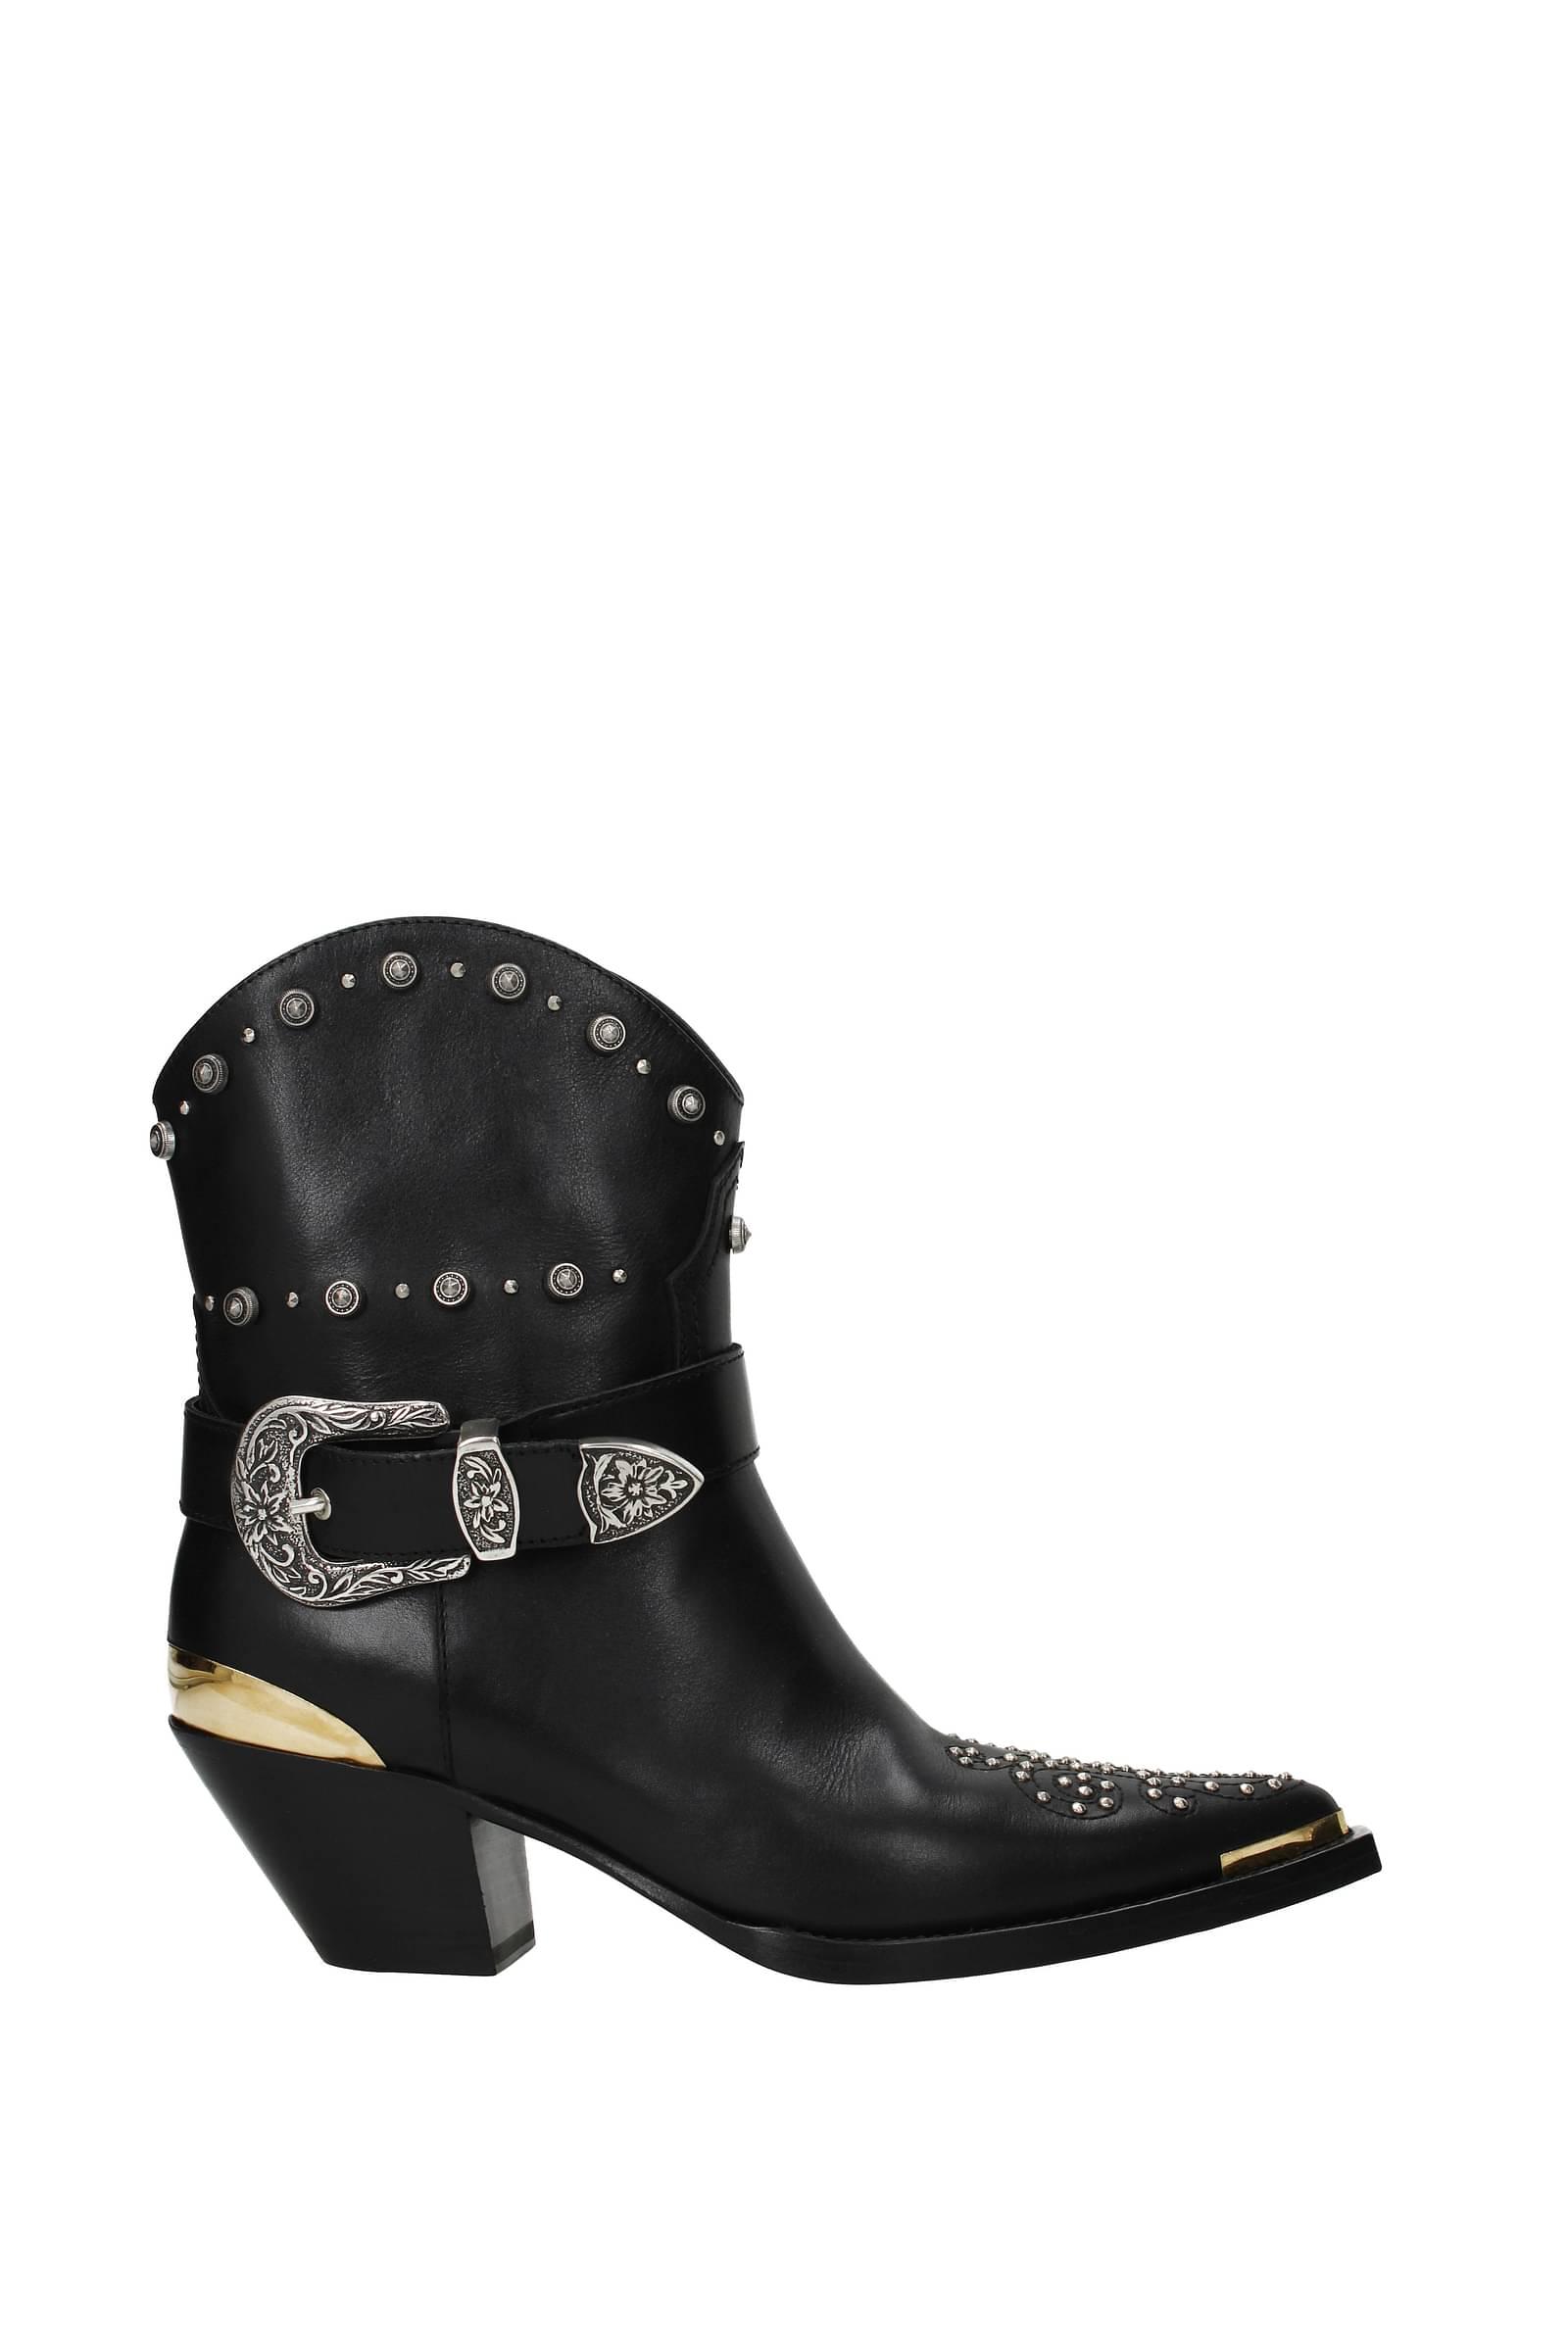 Fausto Puglisi Ankle Boots Leather in Black | Lyst